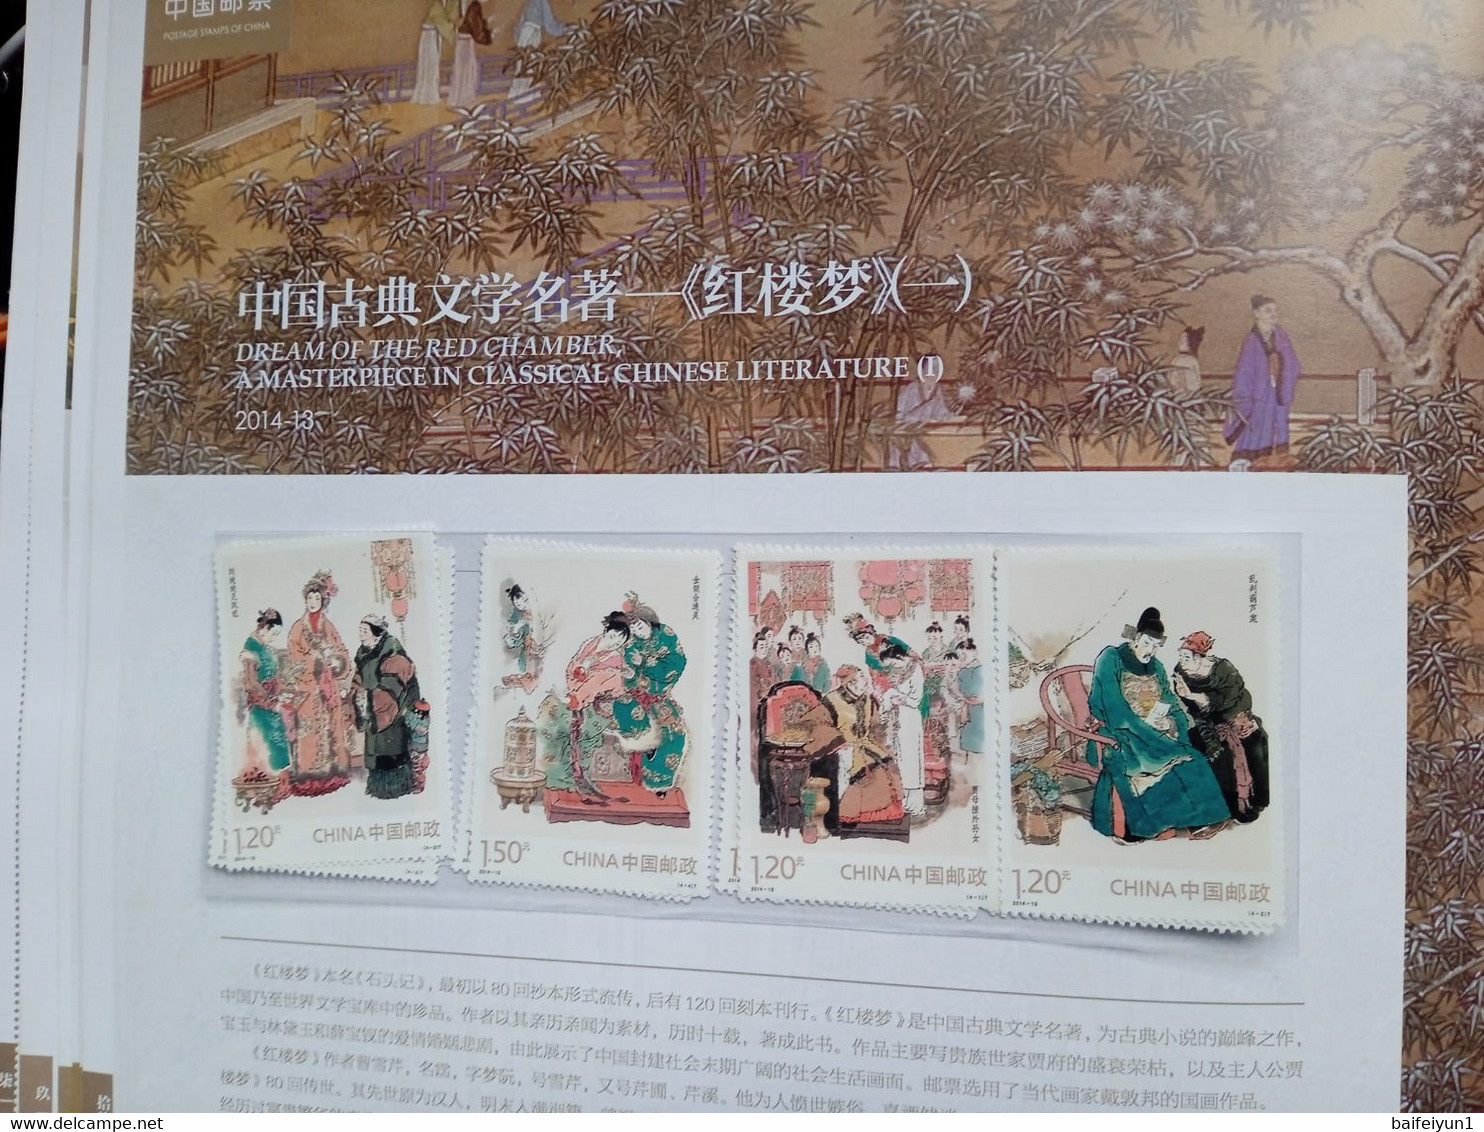 CHINA 2014-1 to 2014-29  China Whole Year of Horse FULL set stamps( no inlude album)